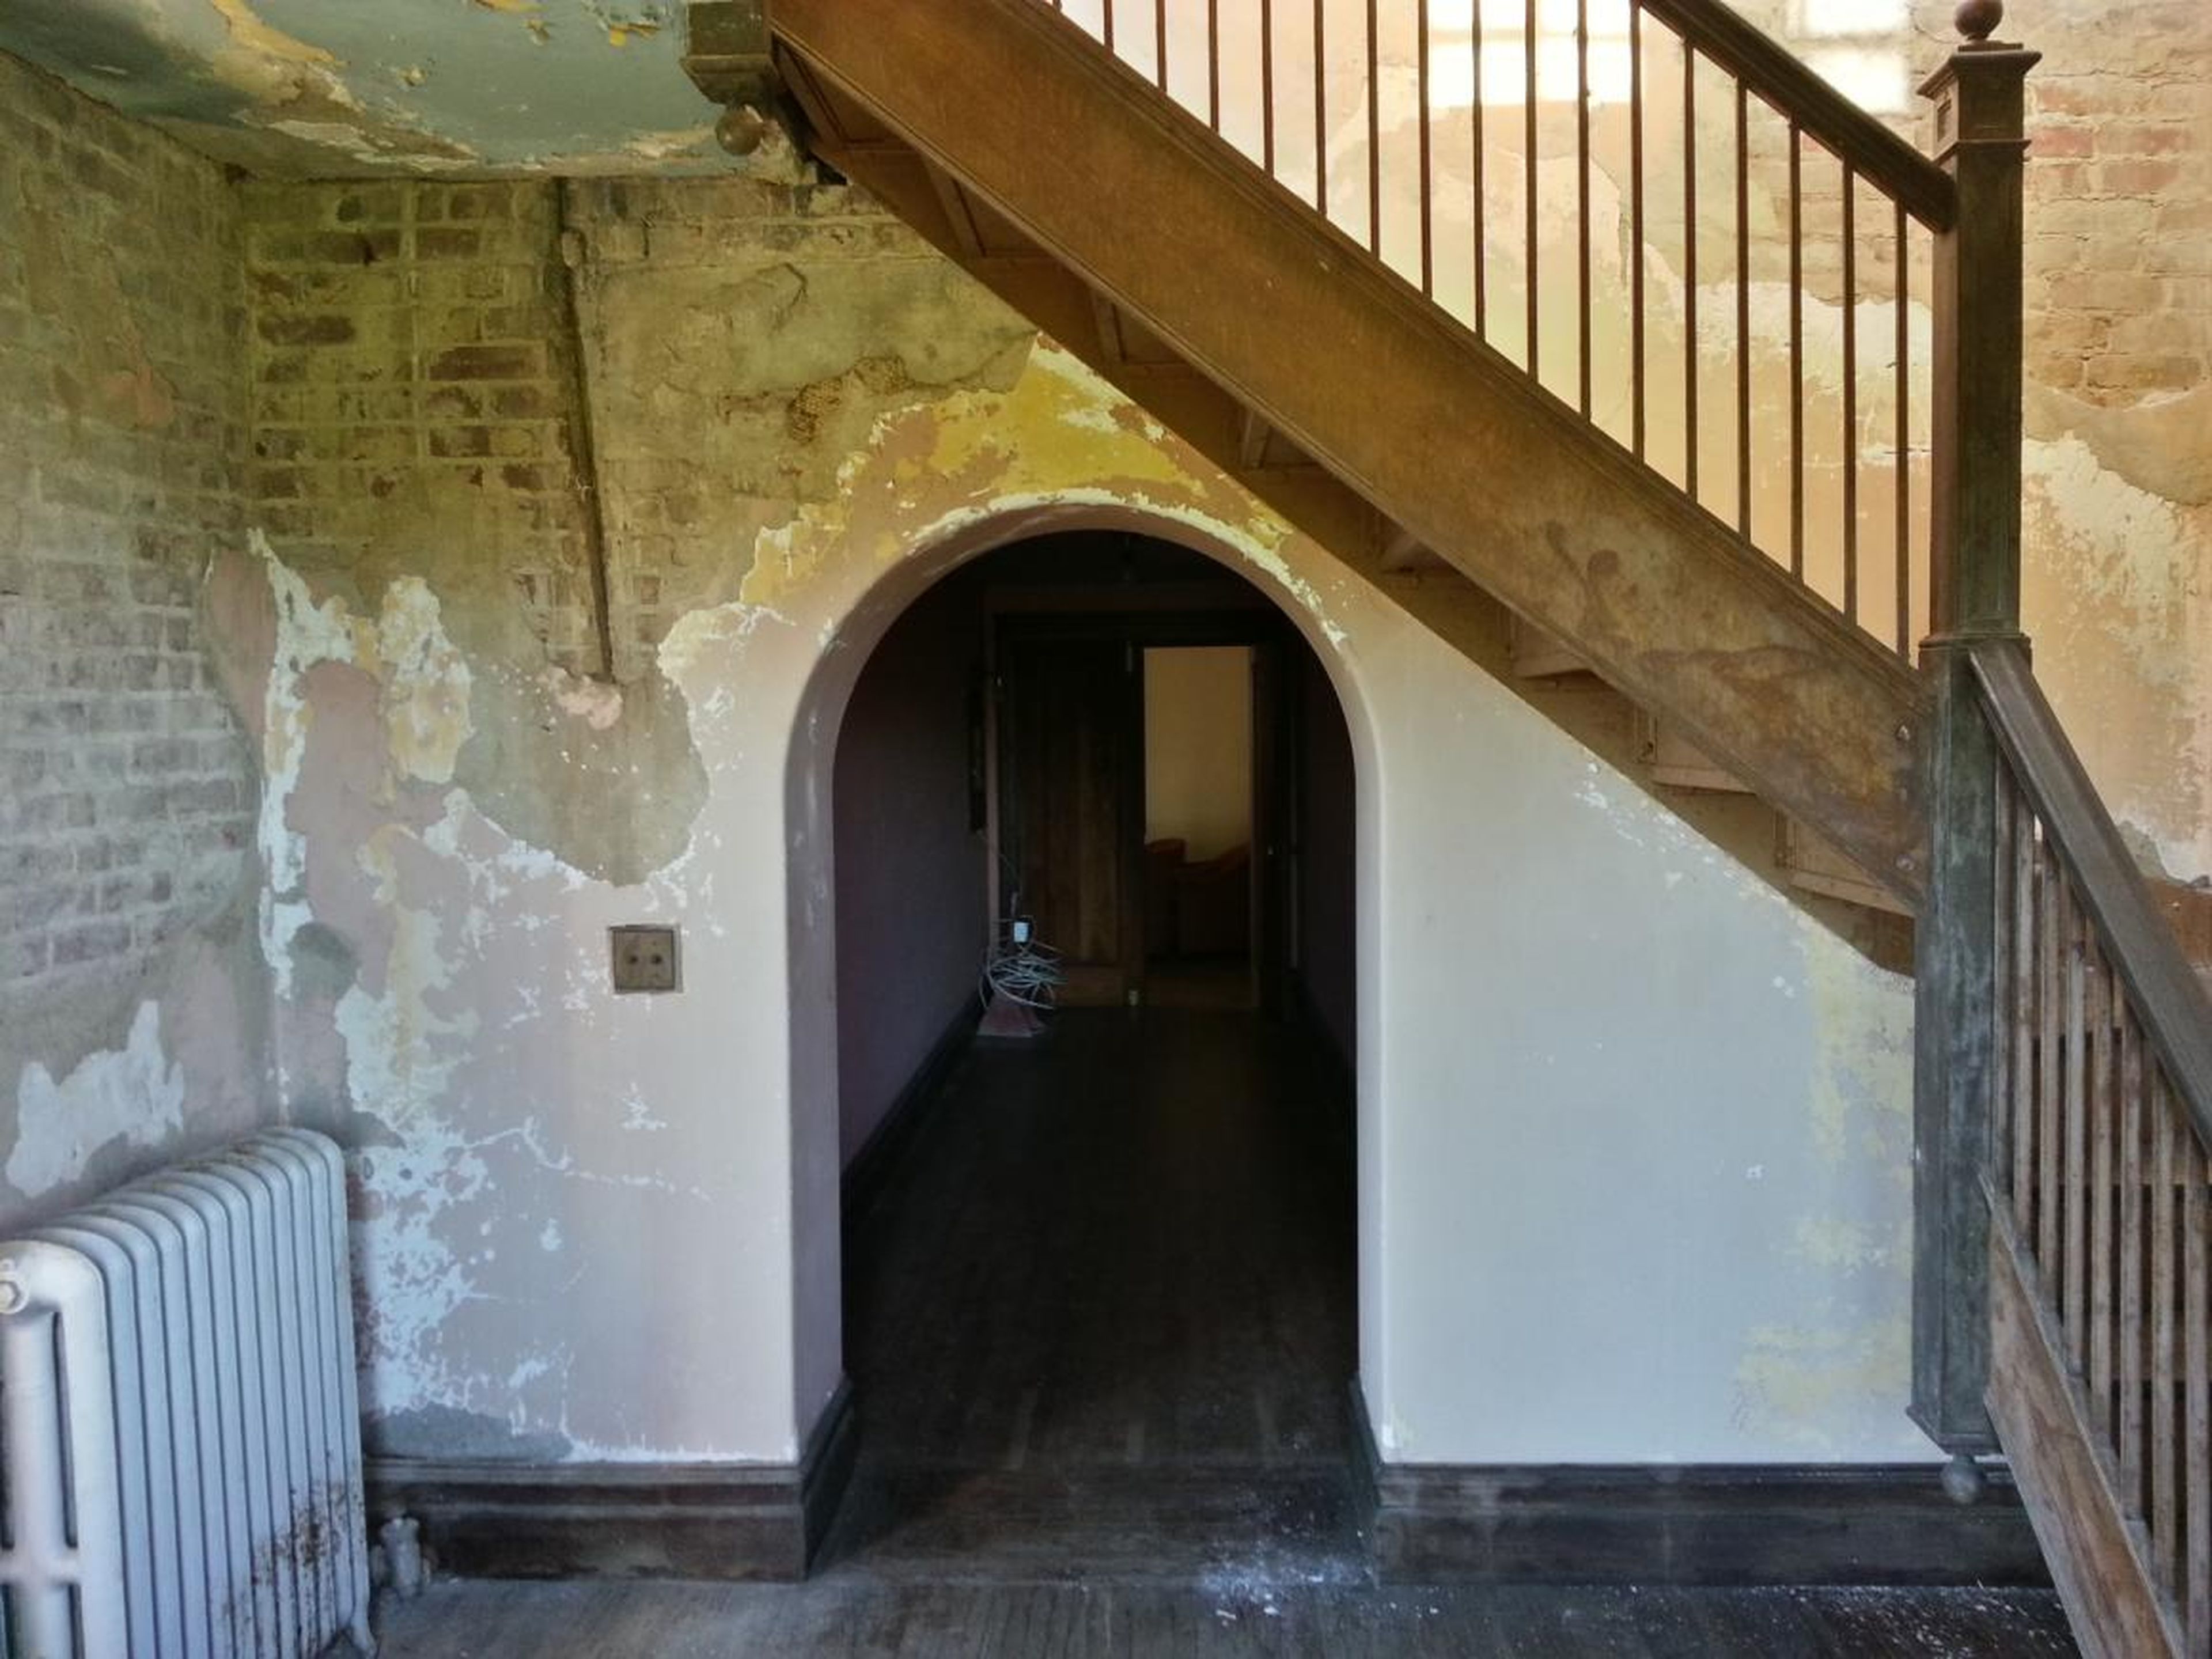 The mansion is occasionally still open to the public for weddings and other events, but local residents have complained that the estate has been mismanaged and that its condition is deteriorating.